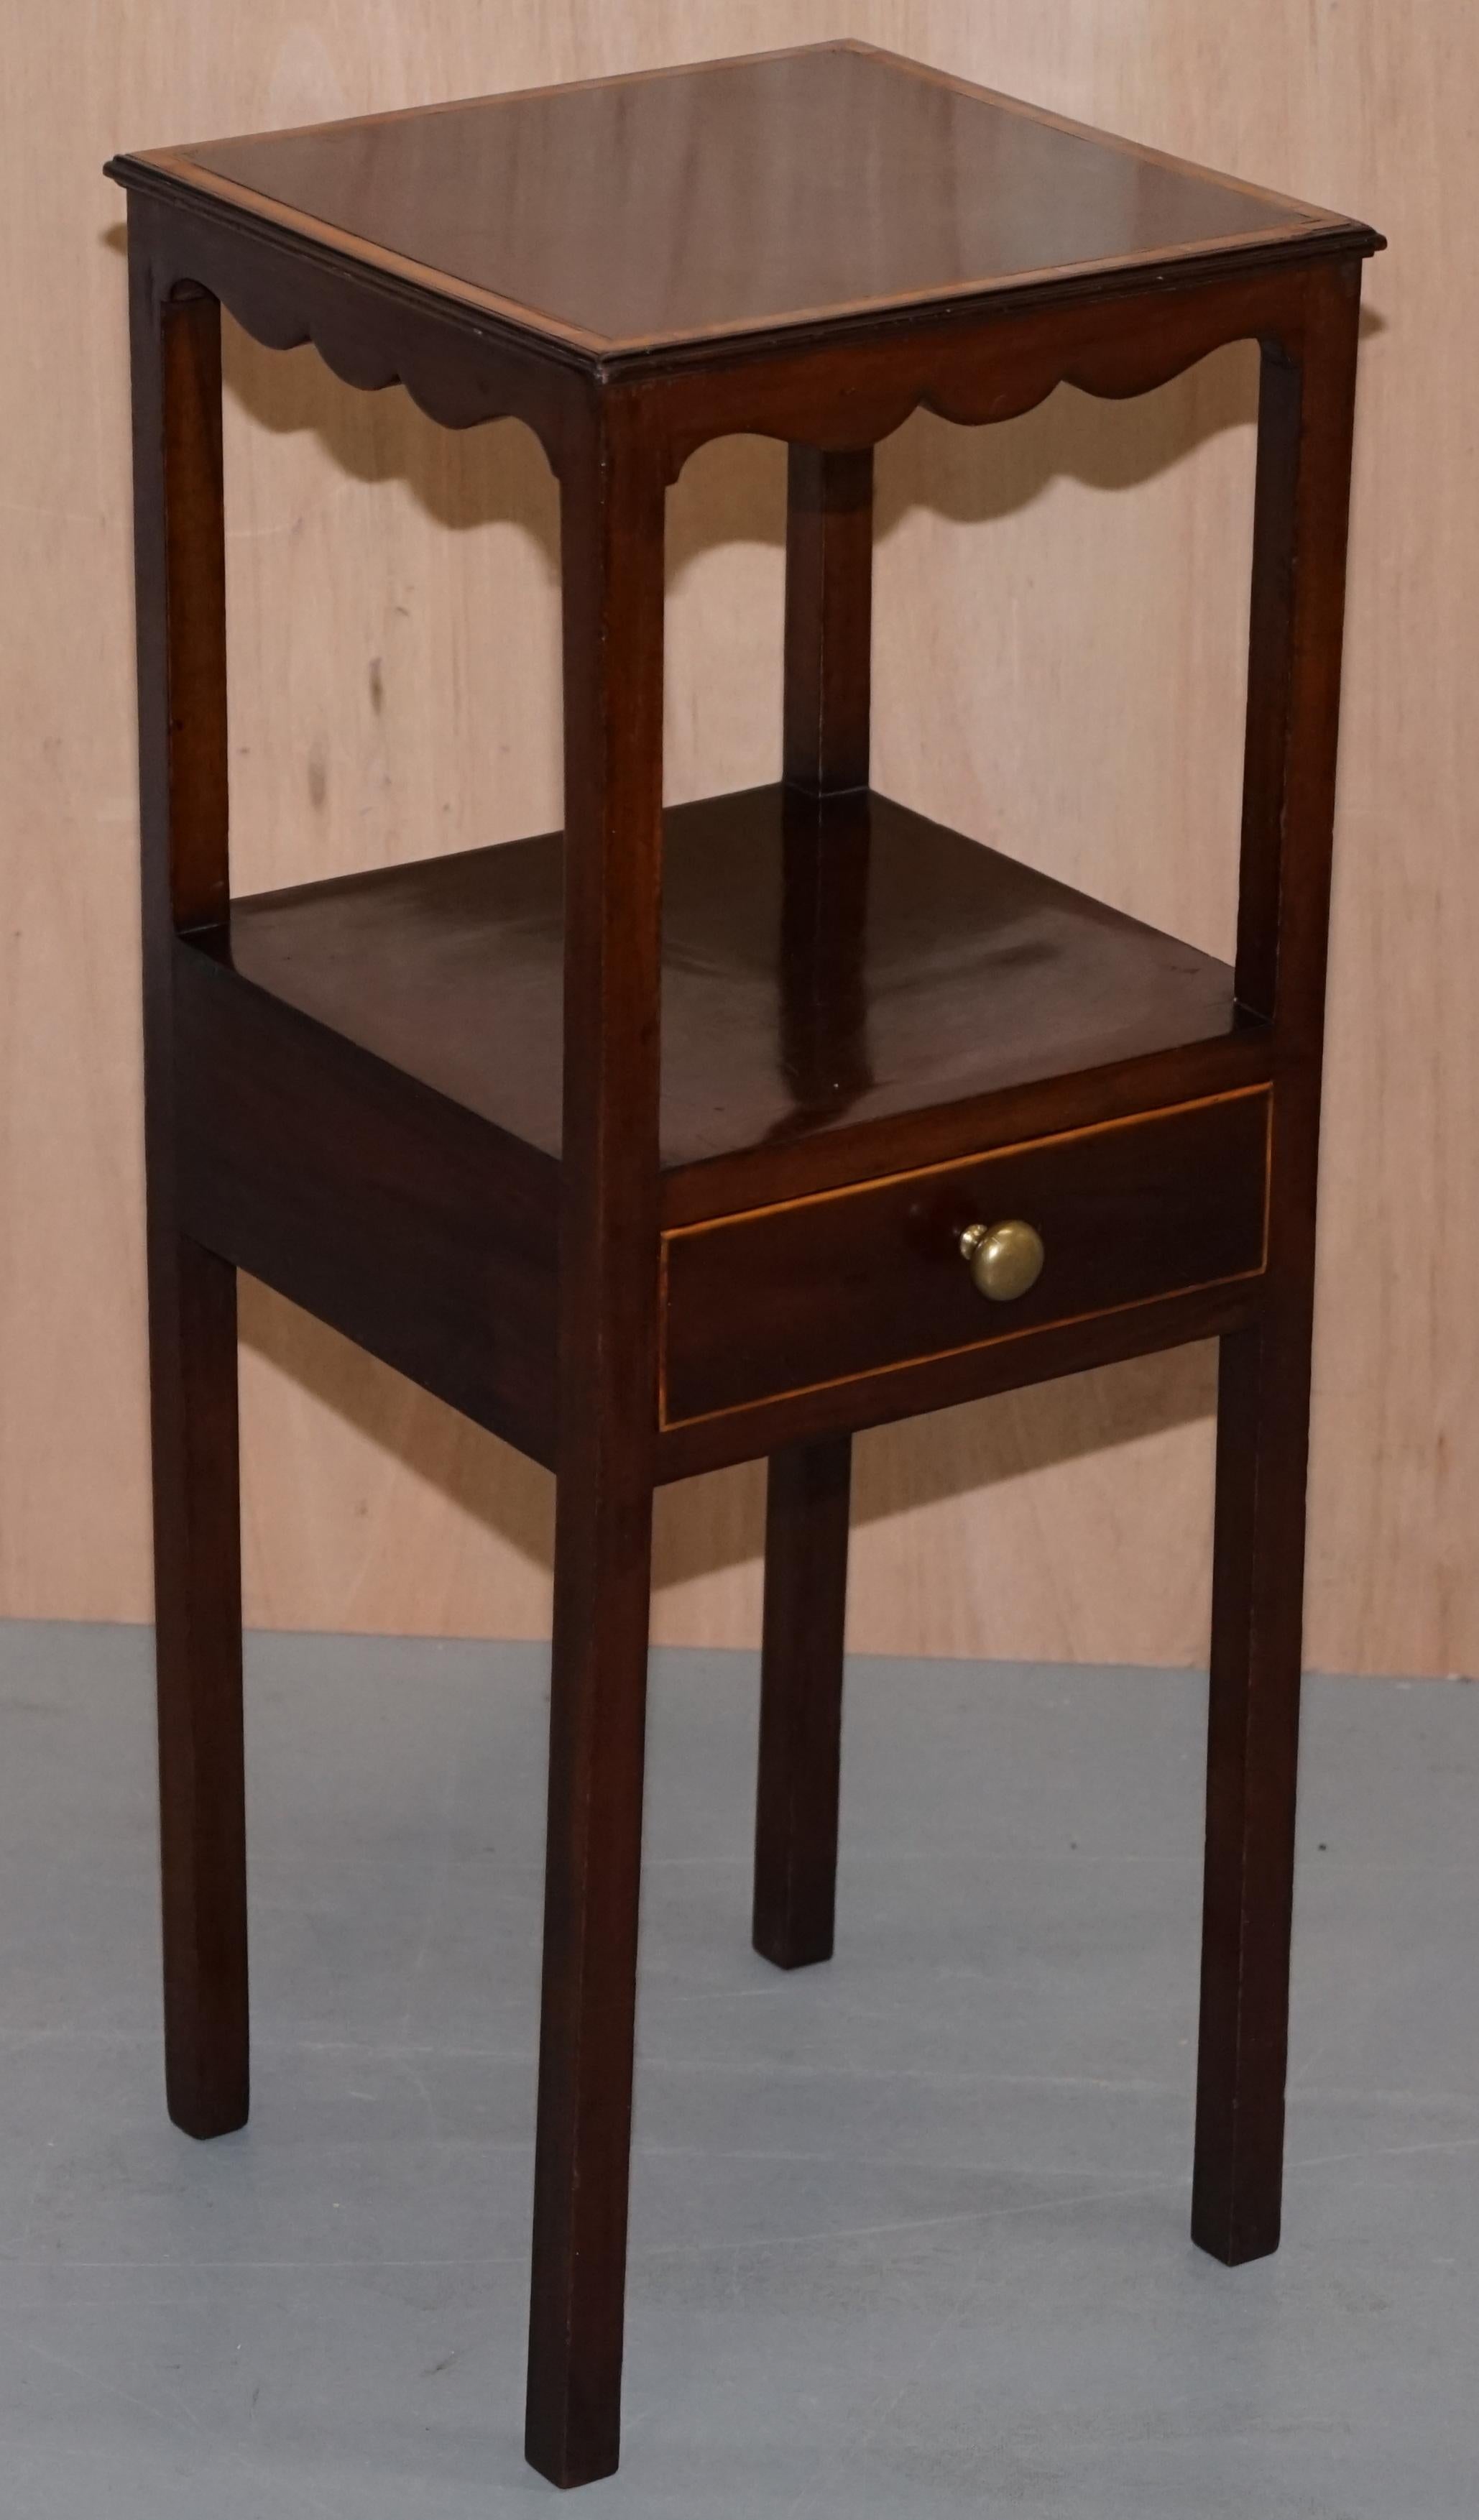 We are delighted to offer for sale this single drawer elegant Victorian Jardinier stand or side end lamp wine table

A nice compact size and very tall for its type, ideally suited as a lamp or wine table

It is very old, has a lovely period